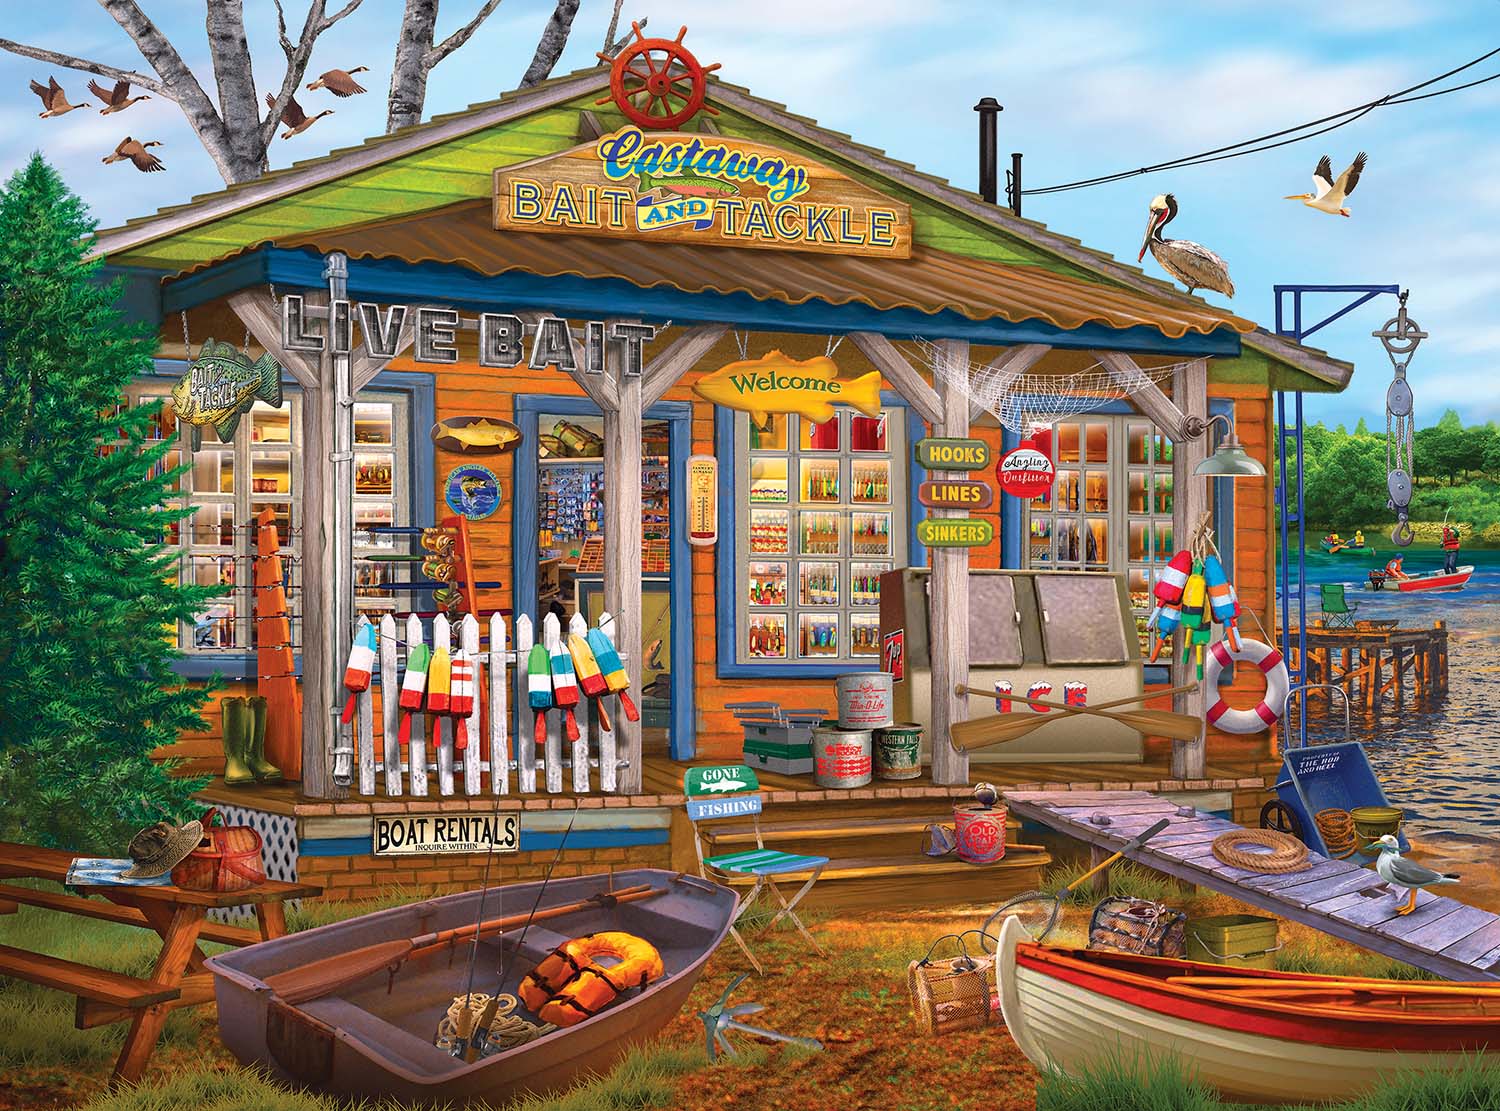 Castaway Bait and Tackle Shop, 1000 Pieces, RoseArt